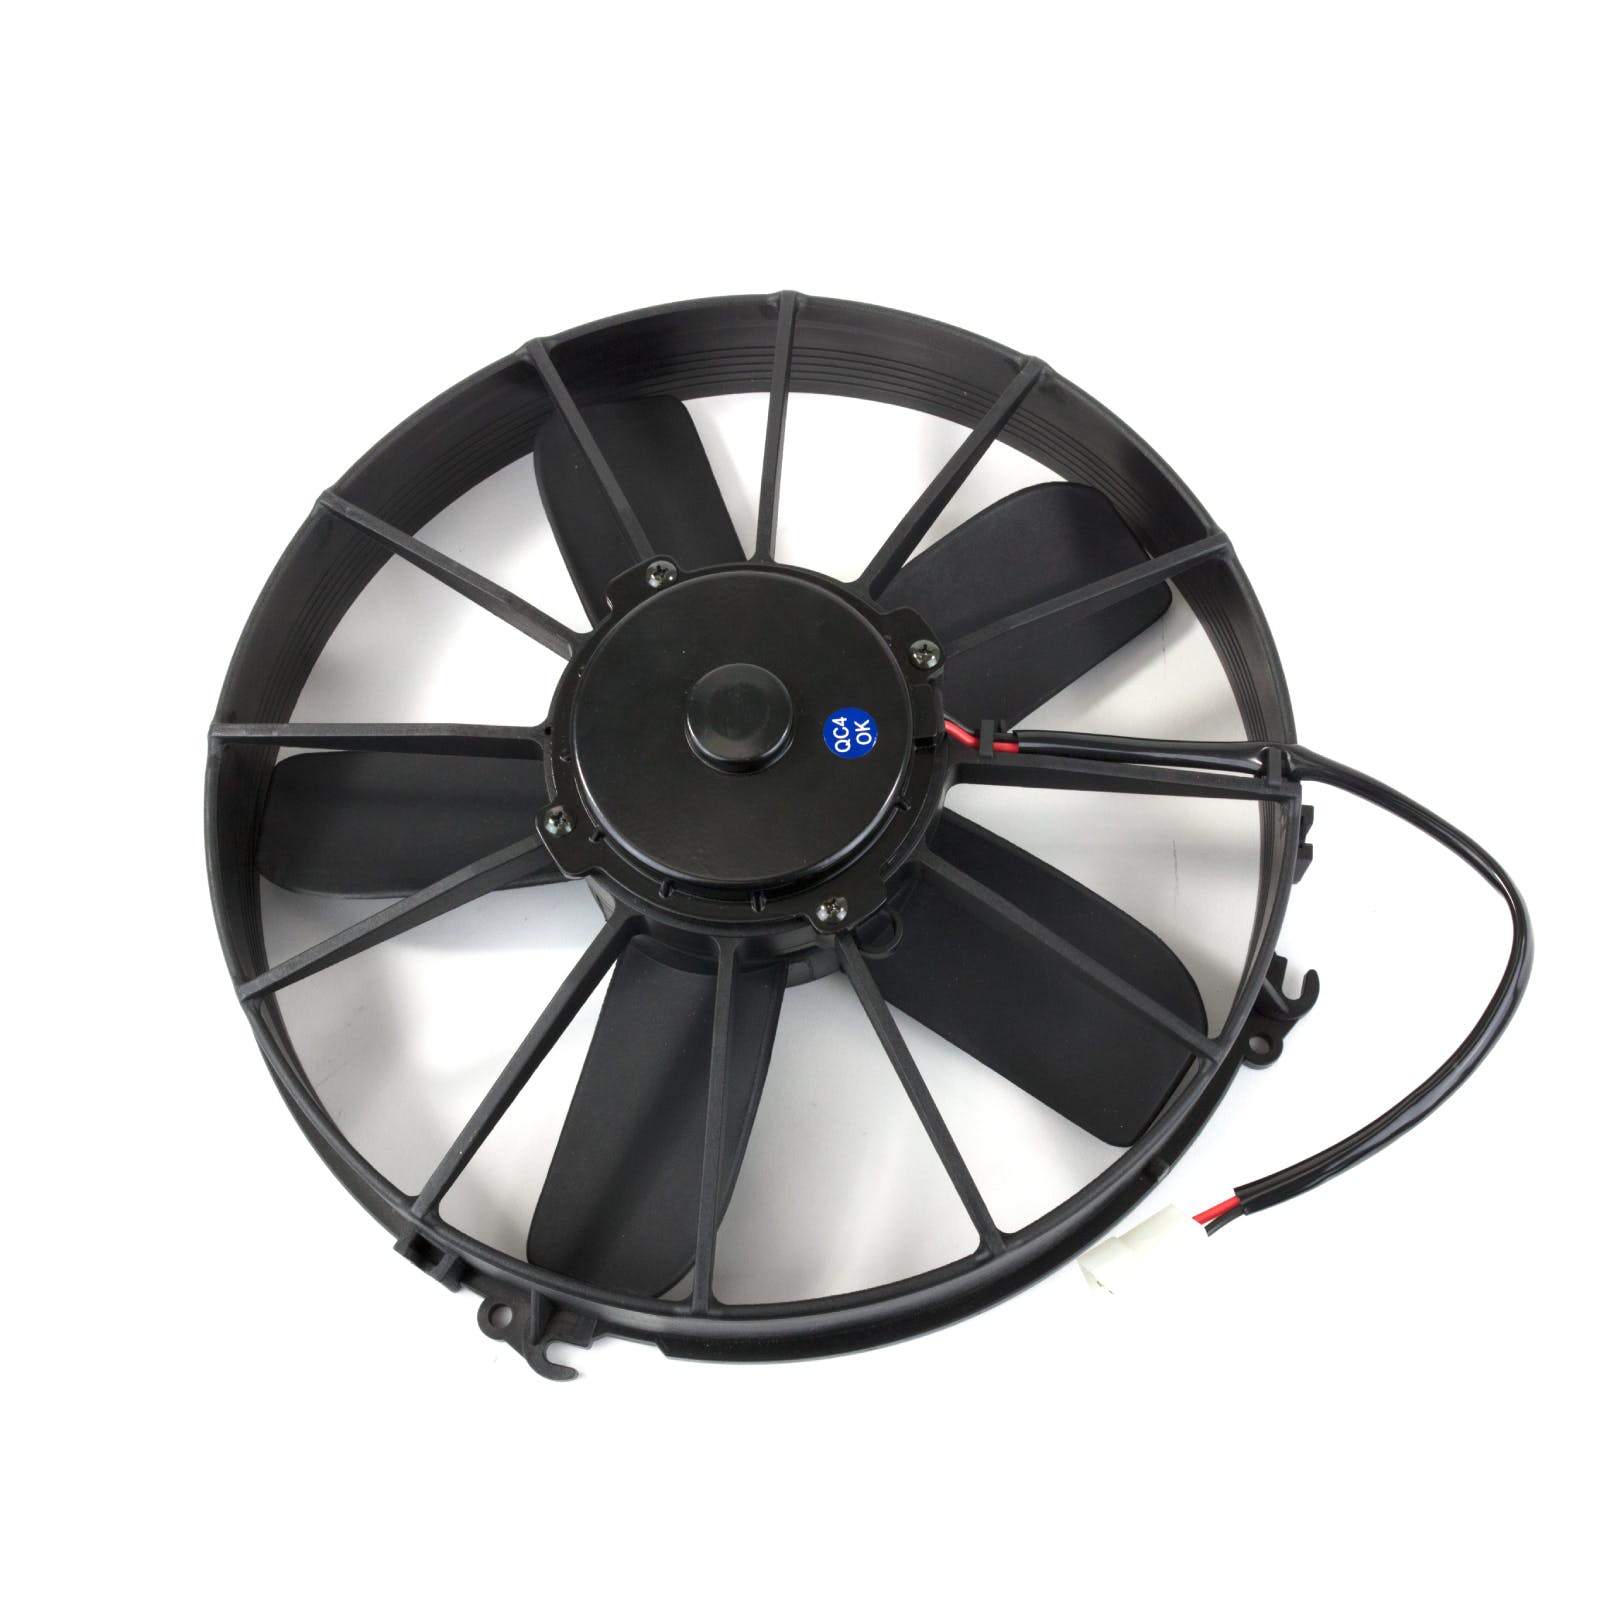 Top Street Performance HC7212 12 inch Proflow Universal Electric Cooling Fan, Straight Blade, Puller, 1,400 CFM